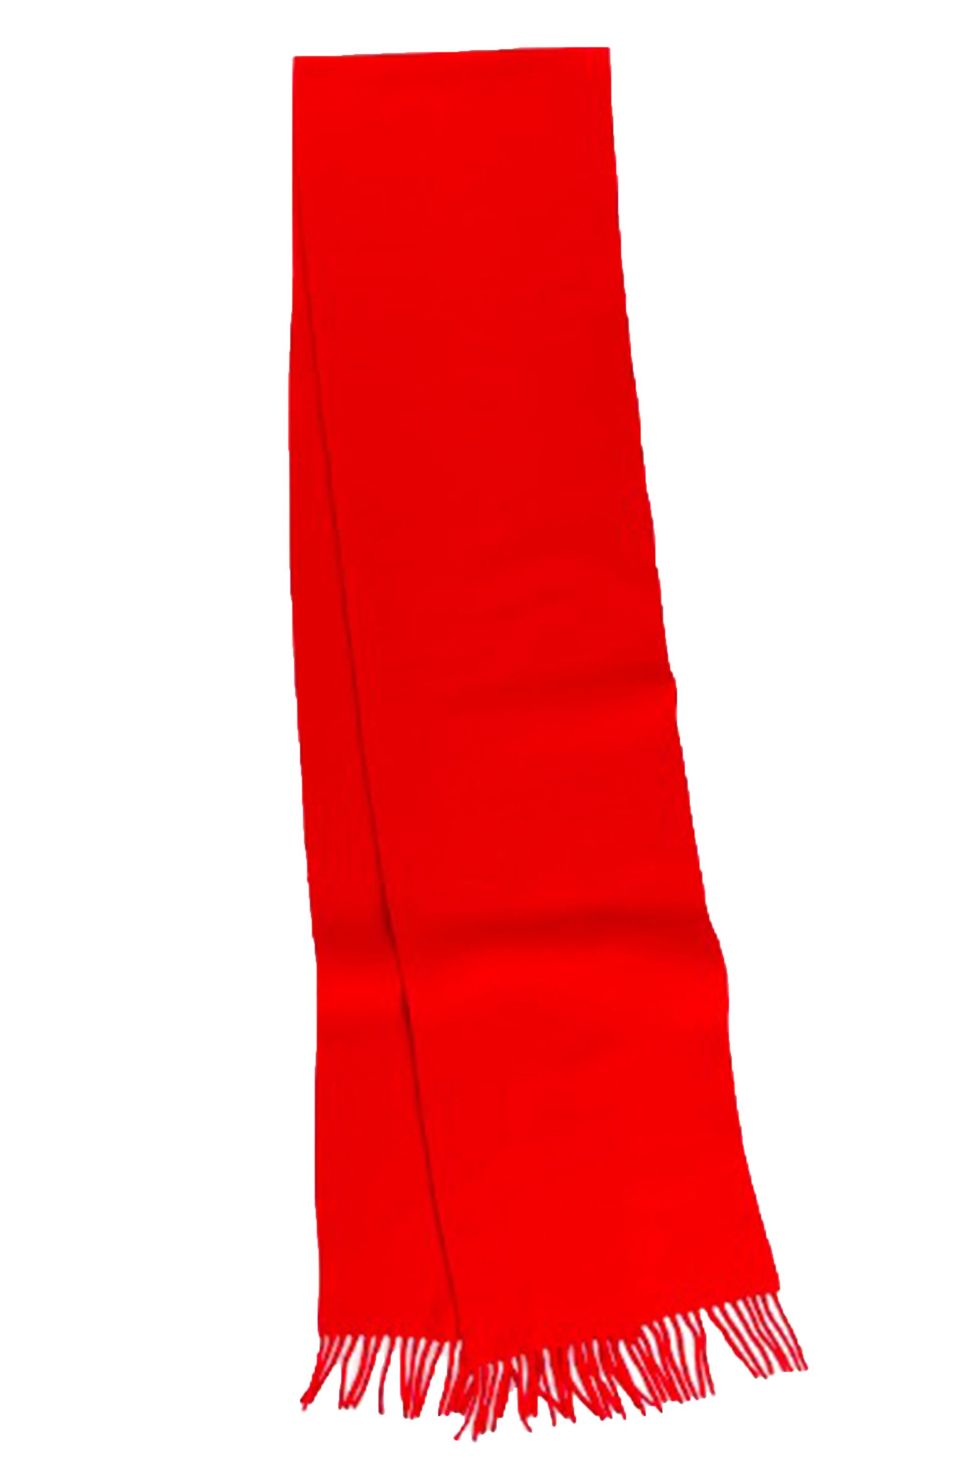 REd Scarf Blank Meme Template